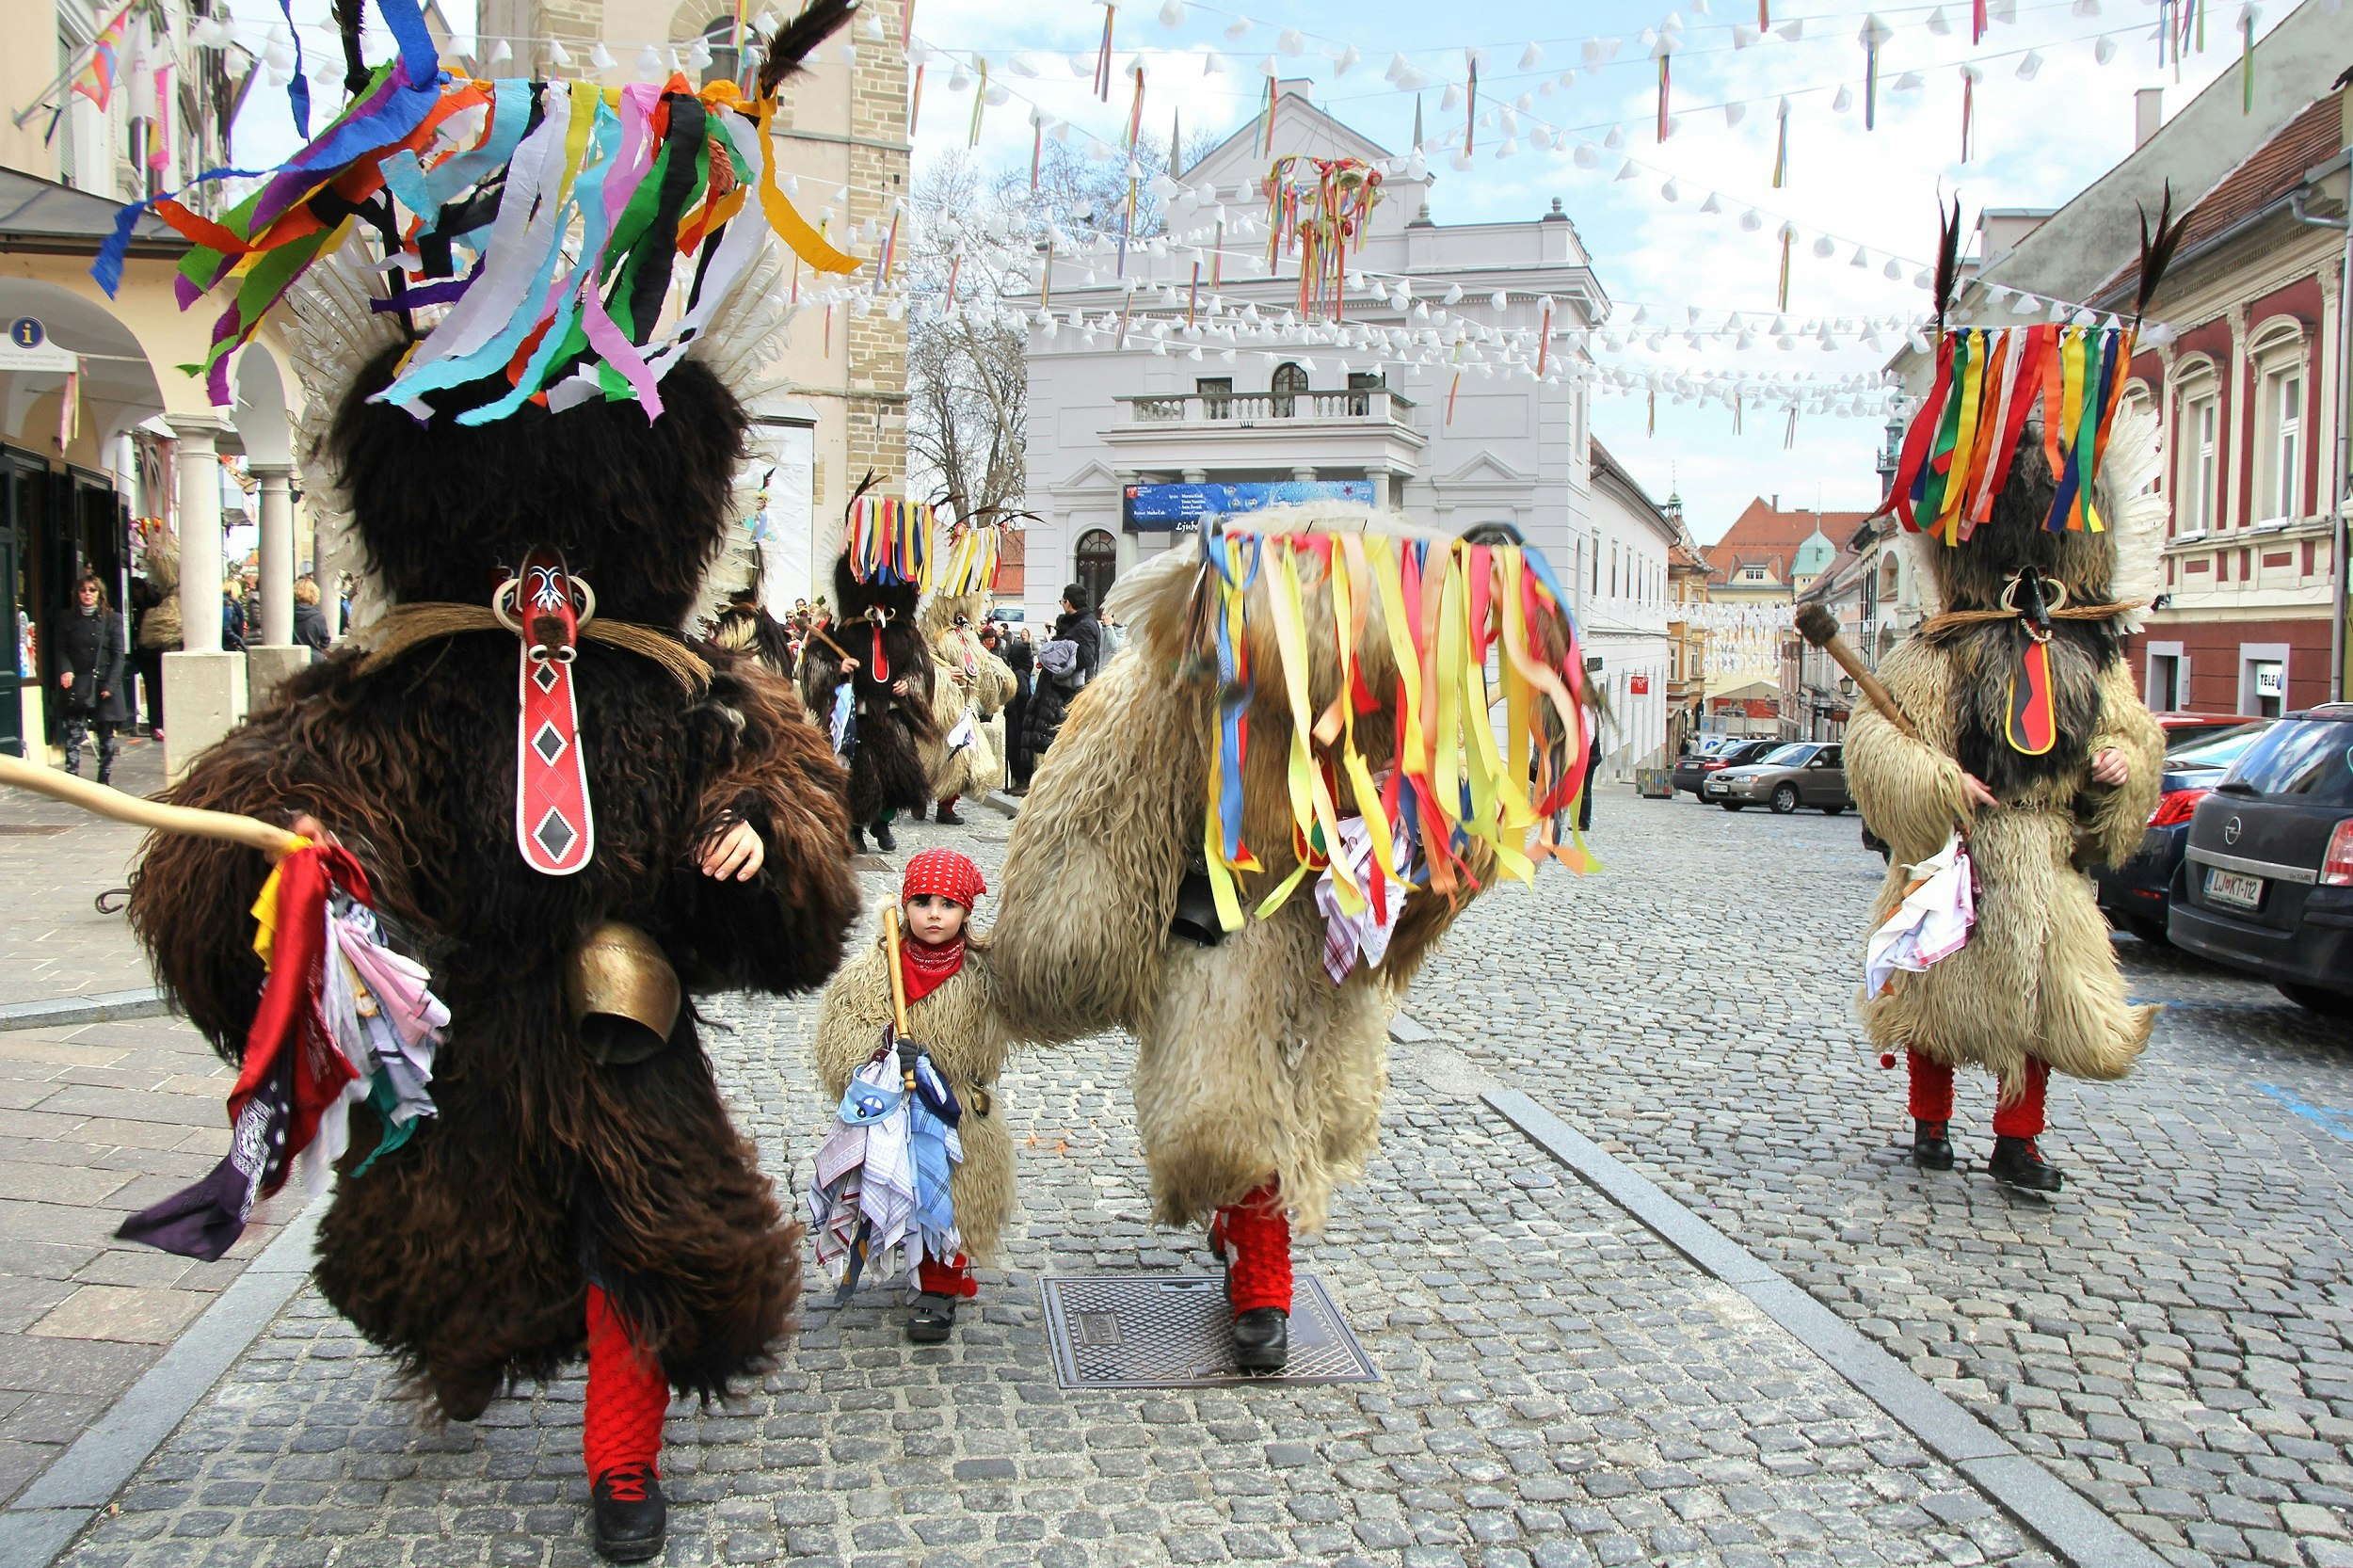 A procession of adults in large furry costumes with masks and headdresses makes its way down a cobbled street. A child wearing the furry costume and a red bandana walks between them